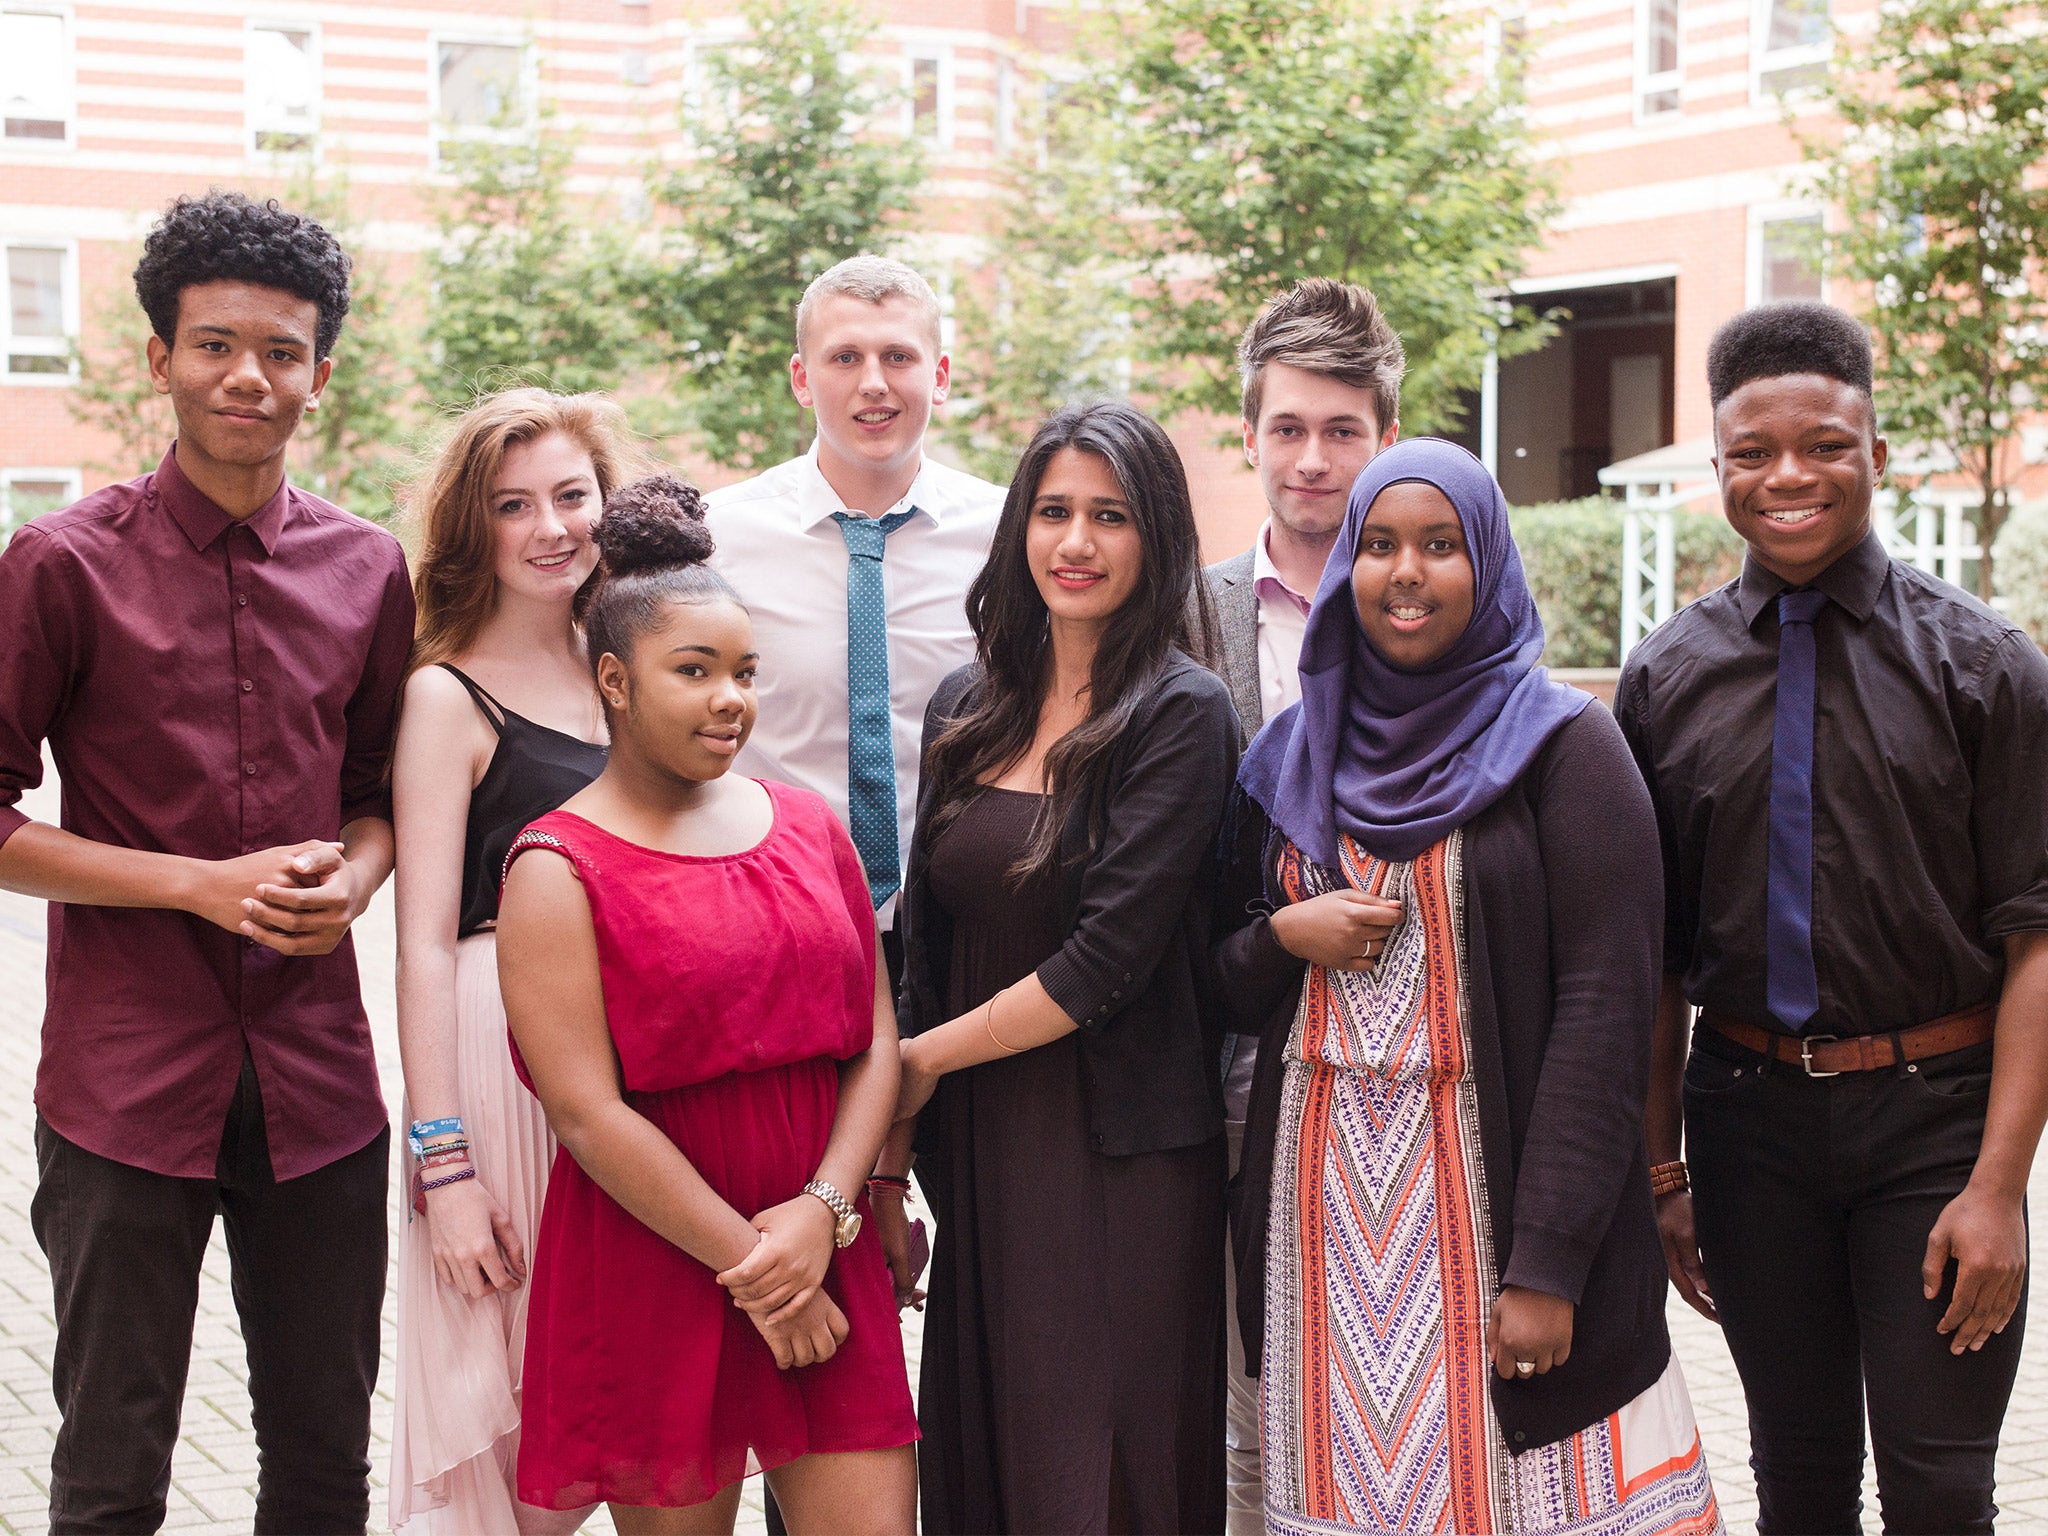 Future alumni: teenagers from disadvantaged areas who took part in King’s College London’s summer school this year